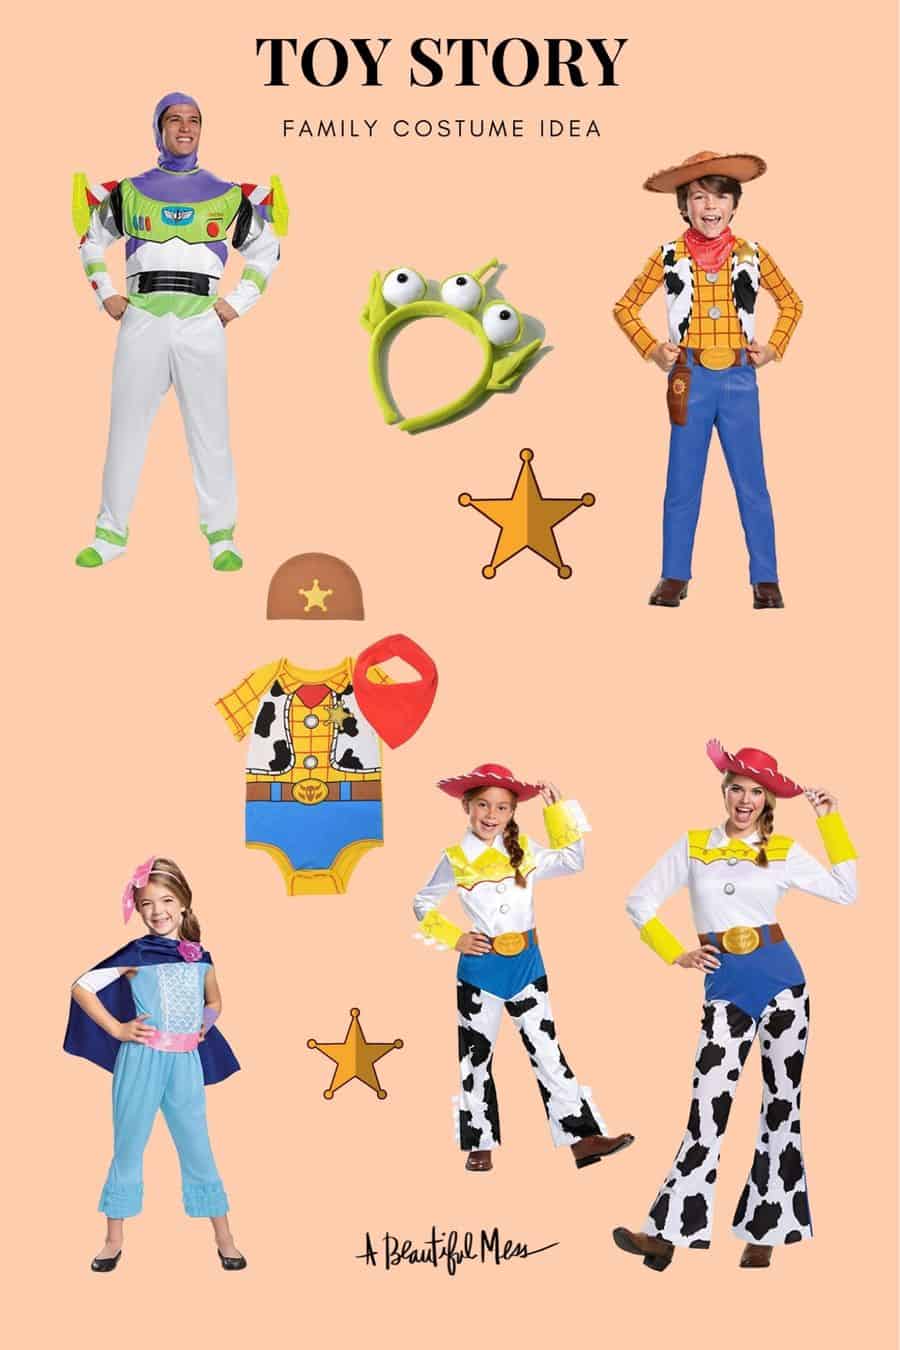 Family halloween costume ideas from Toy Story